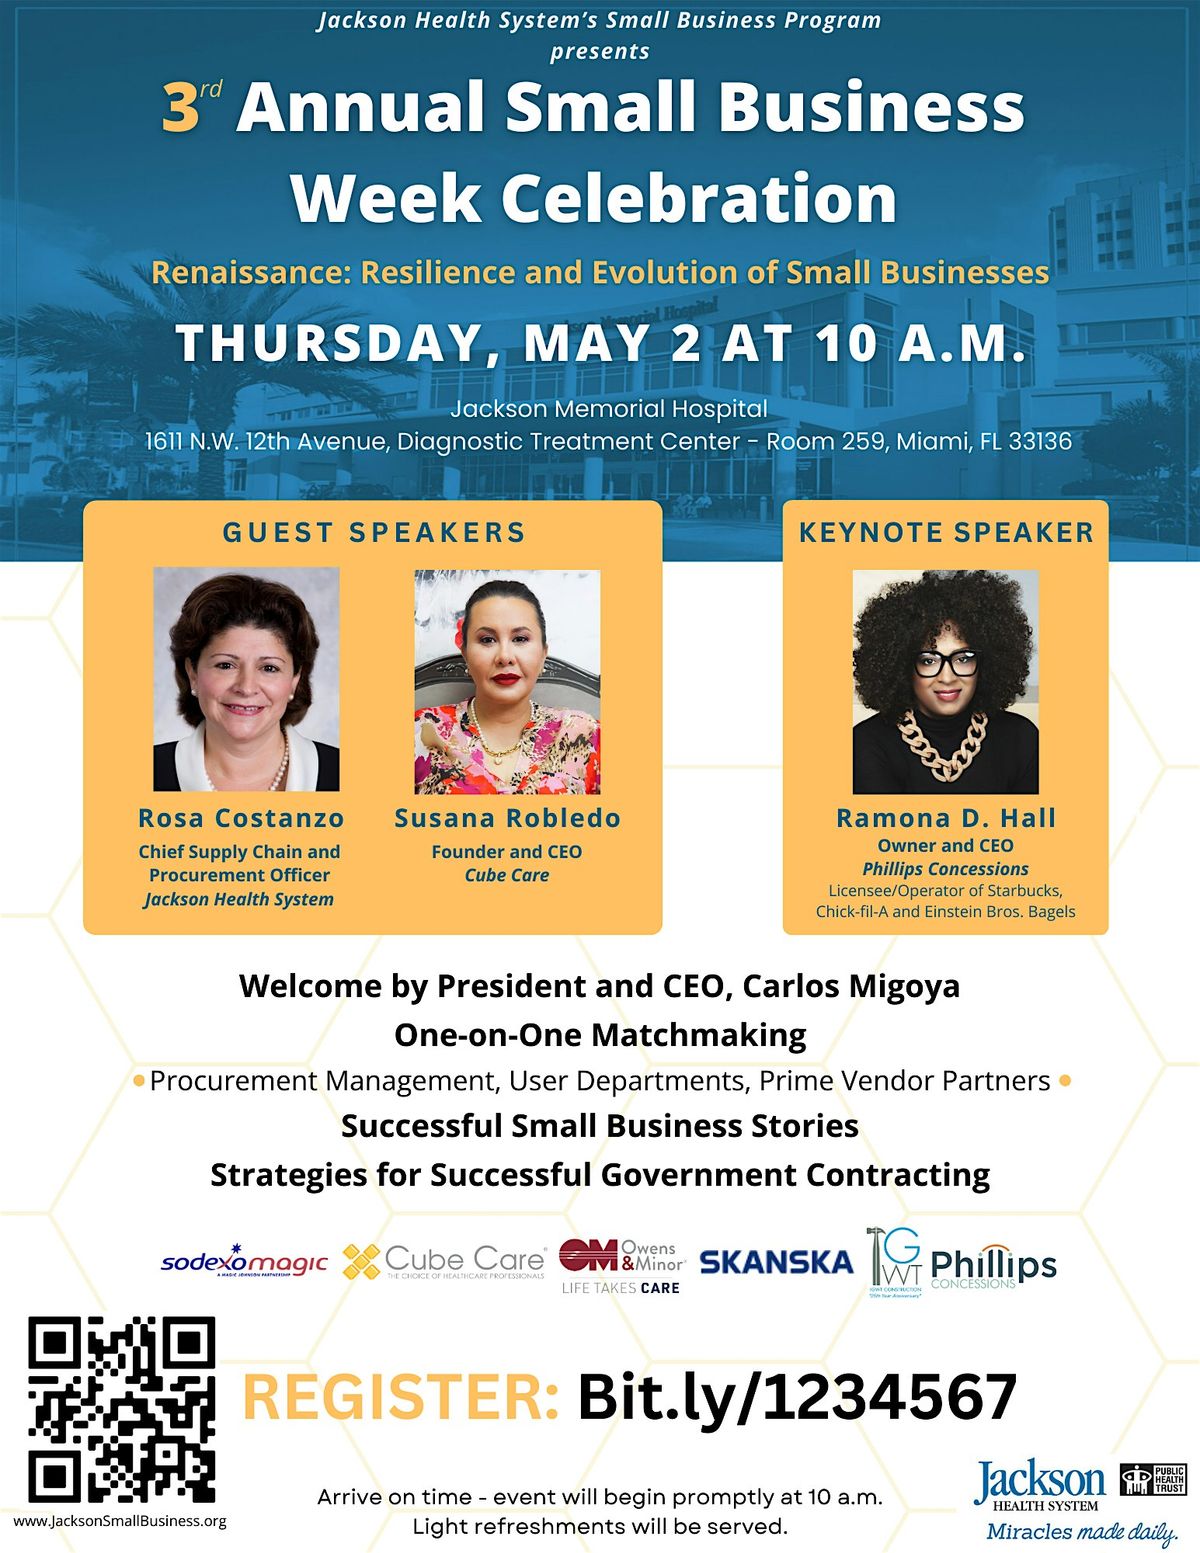 3rd Annual Small Business Week Celebration